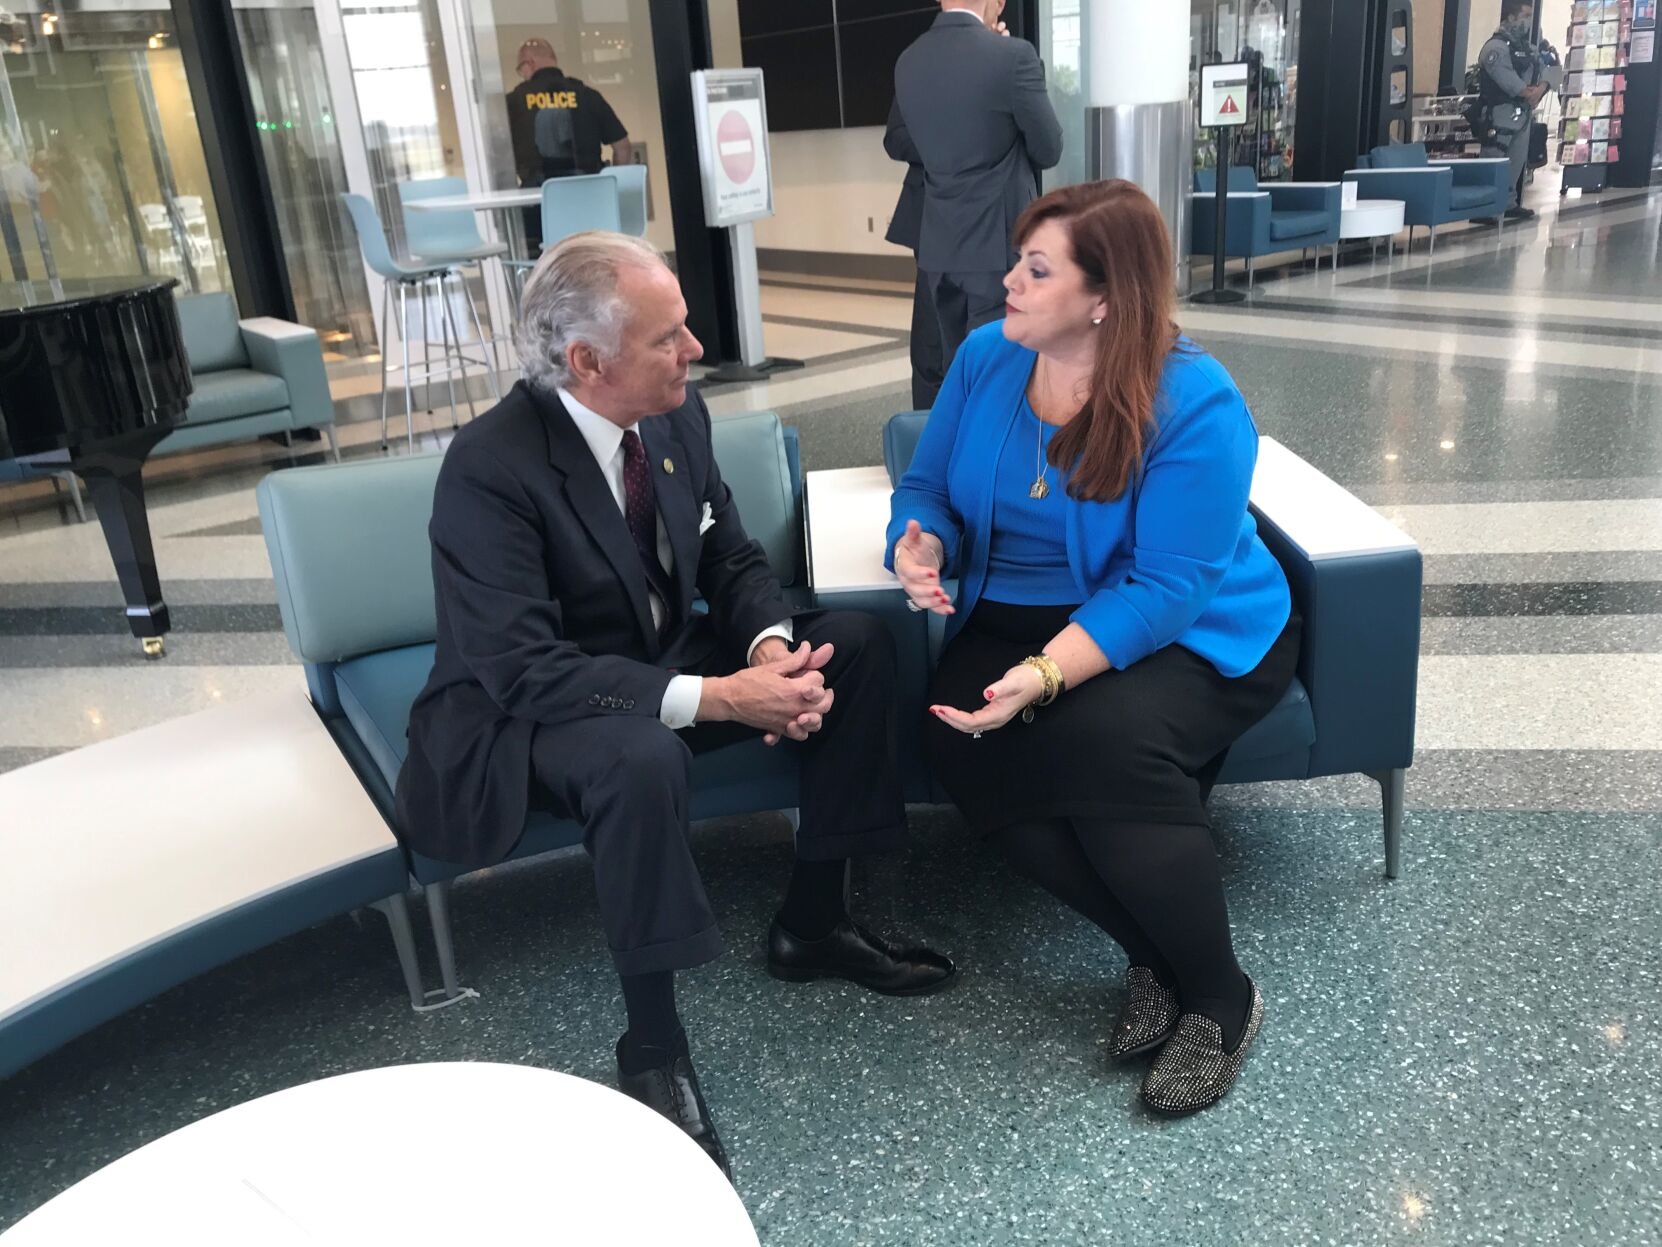 South Carolina Gov. Henry McMaster and Explore Charleston CEO Helen Hill chat after Breeze Airways announced in March 2022 that it will offer four new flights from the Lowcountry, including nonstop routes to Las Vegas and San Francisco. Hill serves as chairwoman of the Charleston County Aviation Authority, which oversees the state's largest airport.